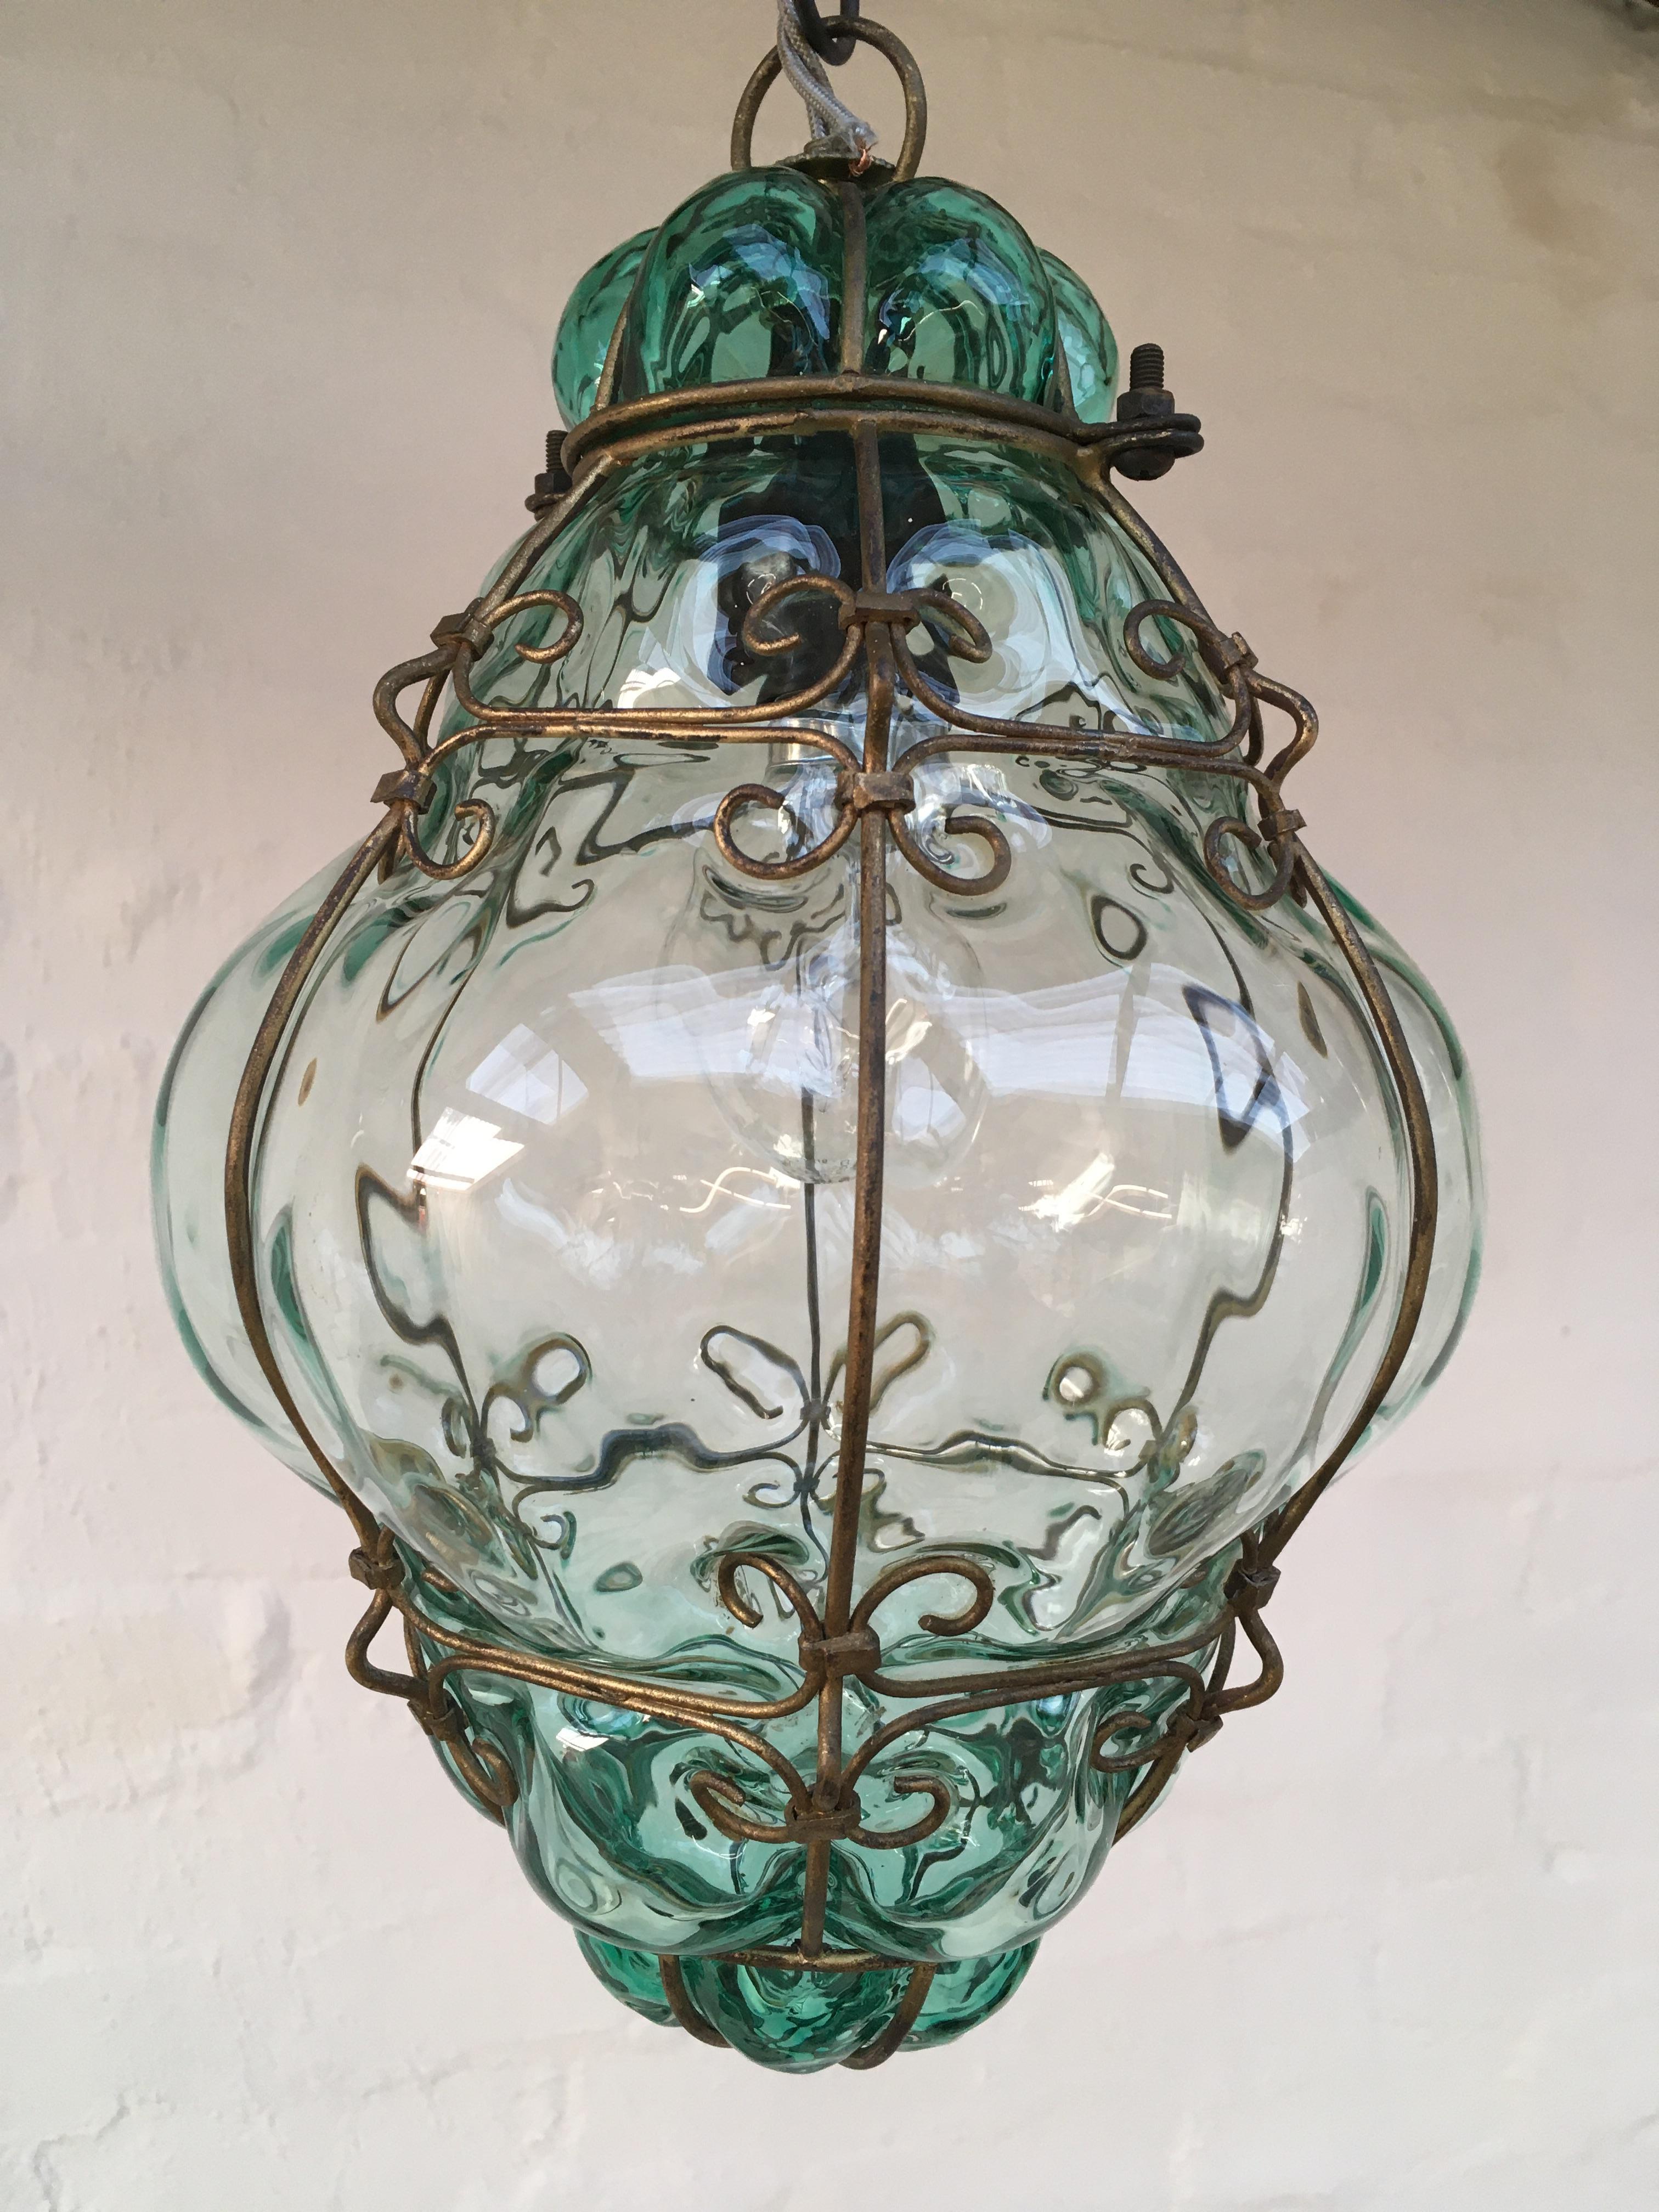 A lovely light for hallways and entrances. A hand blown Venetian glass lantern, attributed to Seguso. 

It casts a beautiful rippling light pattern, like a fishing net, or the reflection of rippling water, on surrounding surfaces. The glass color is